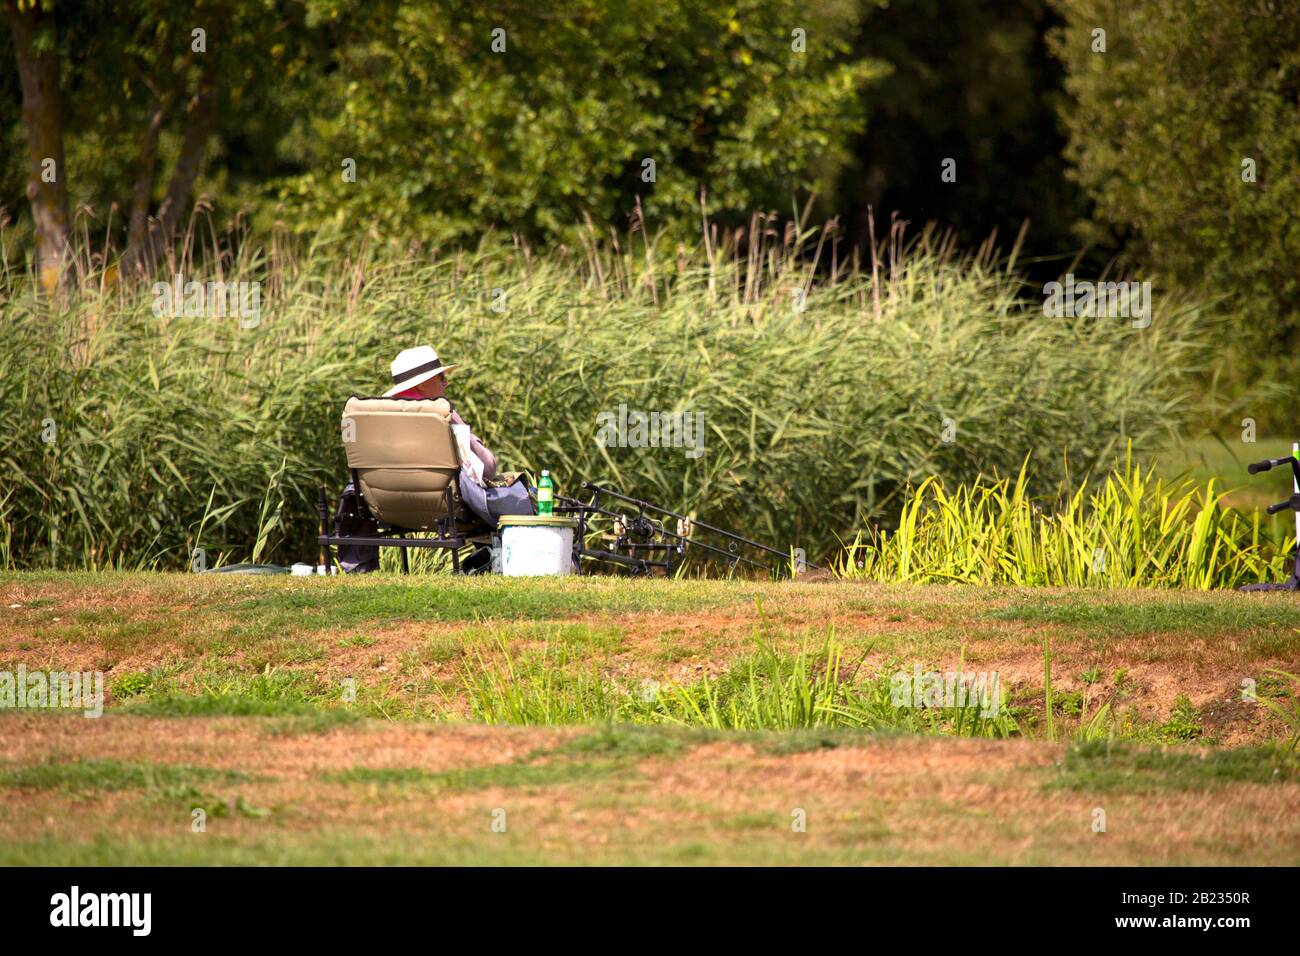 A freshwater angler fishing for carp on a summer's day Stock Photo